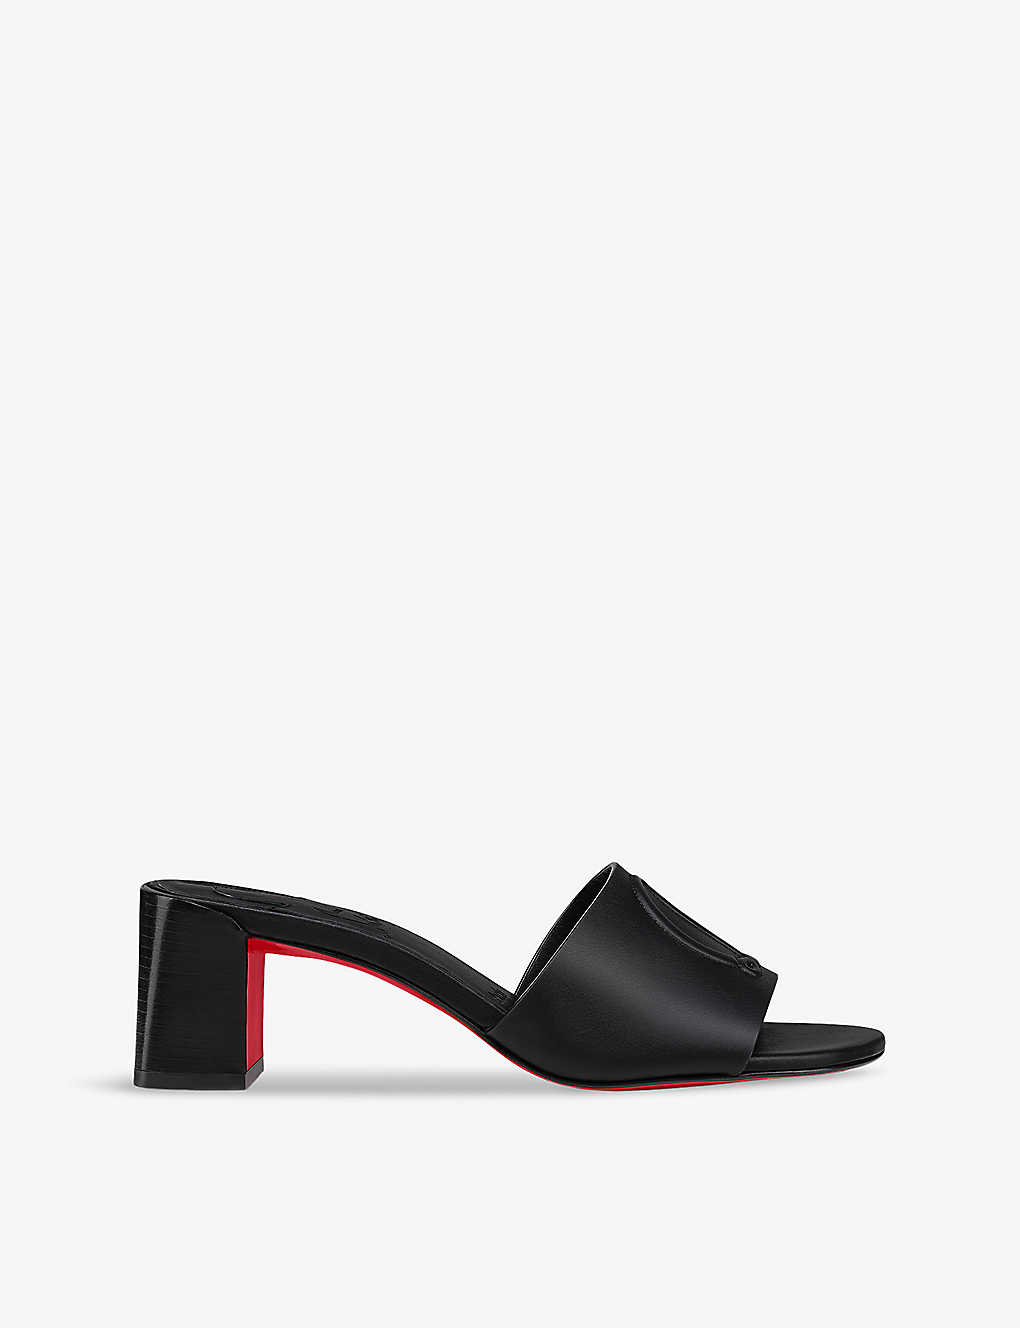 Shop Christian Louboutin Women's Black So Cl 55 Leather Heeled Mules